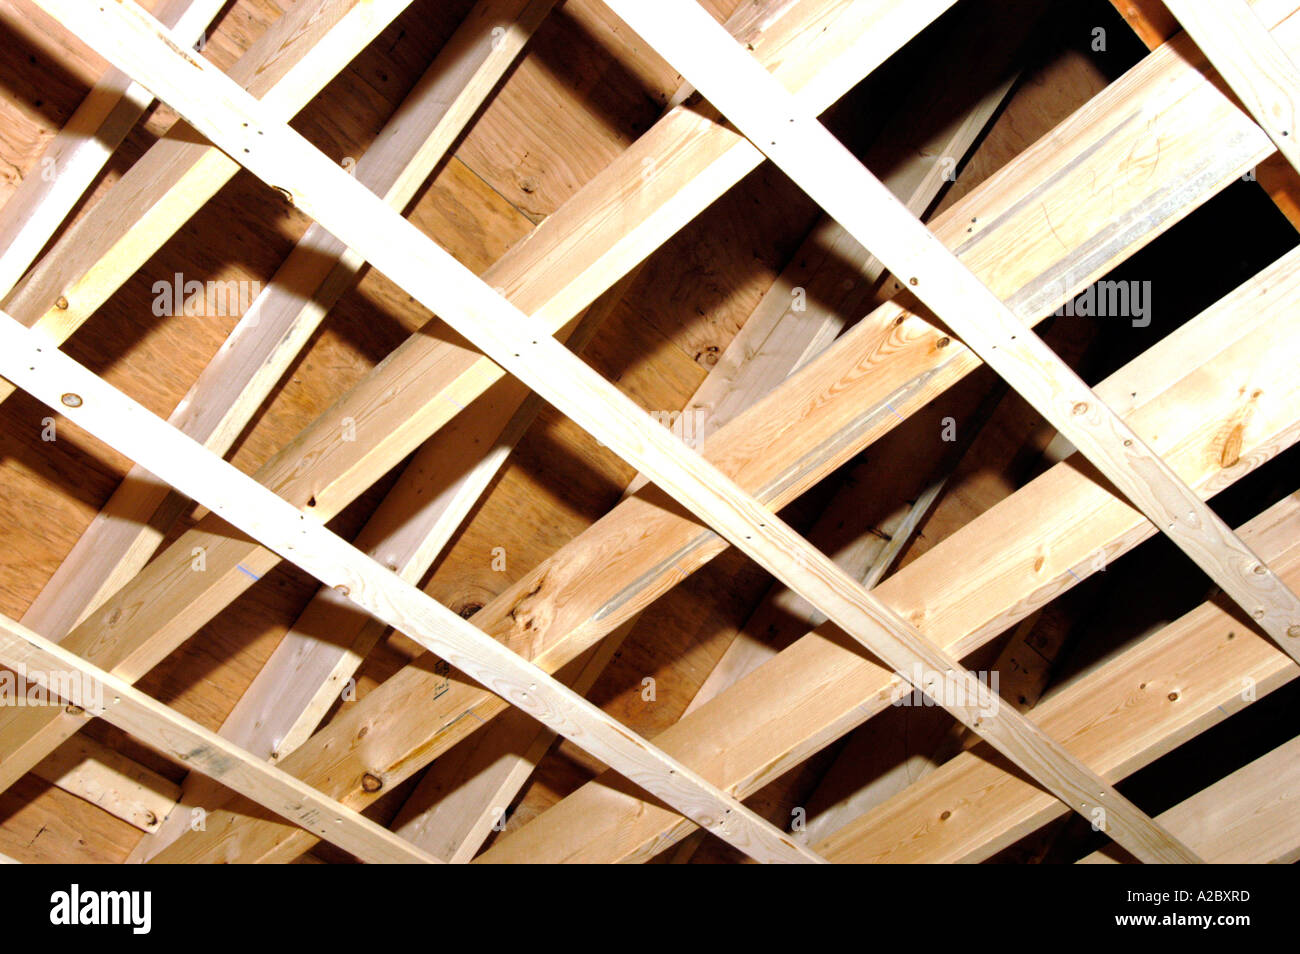 Ceiling Joists Stock Photos Ceiling Joists Stock Images Page 2